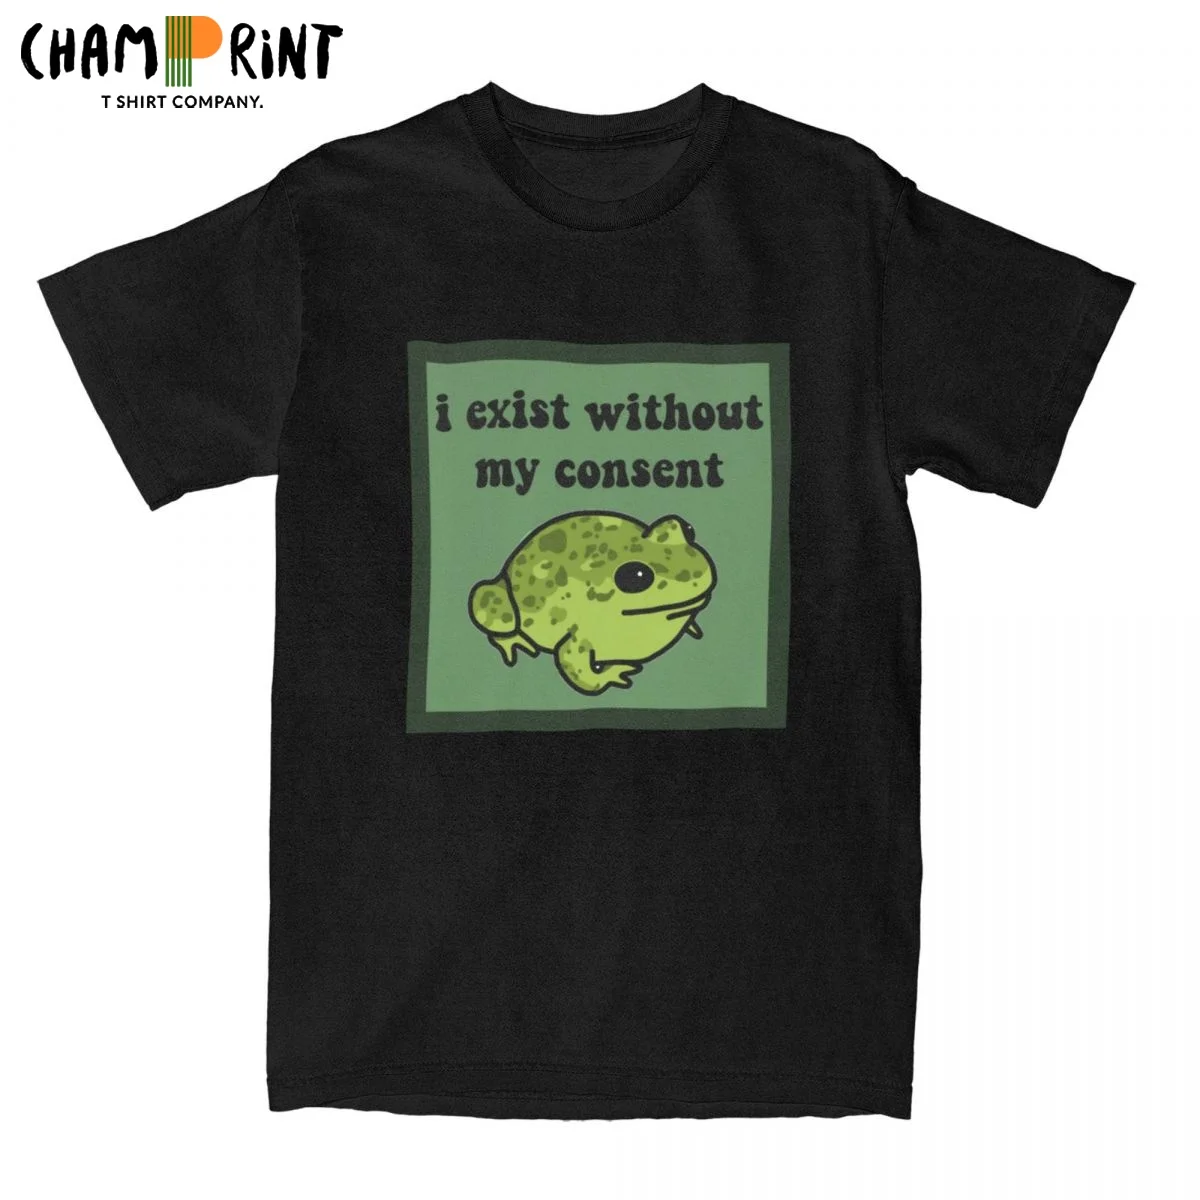 I Exist Without My Consent Frog T Shirt Men Pure Cotton Funny T-Shirt Round Neck Tee Shirt Short Sleeve Clothes Gift Idea